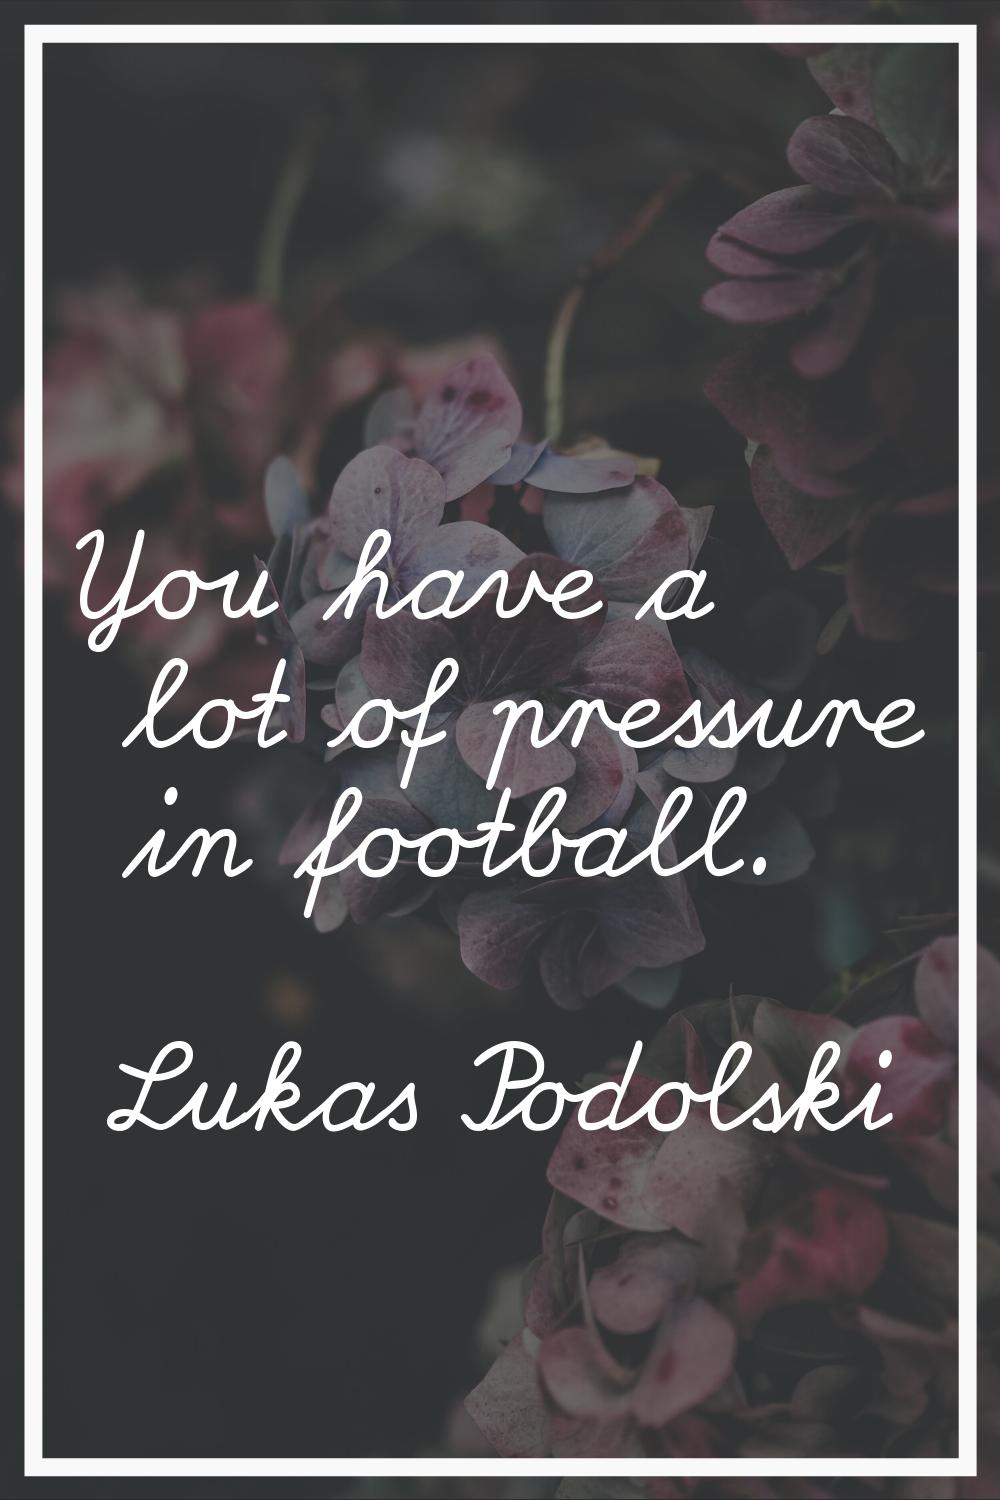 You have a lot of pressure in football.